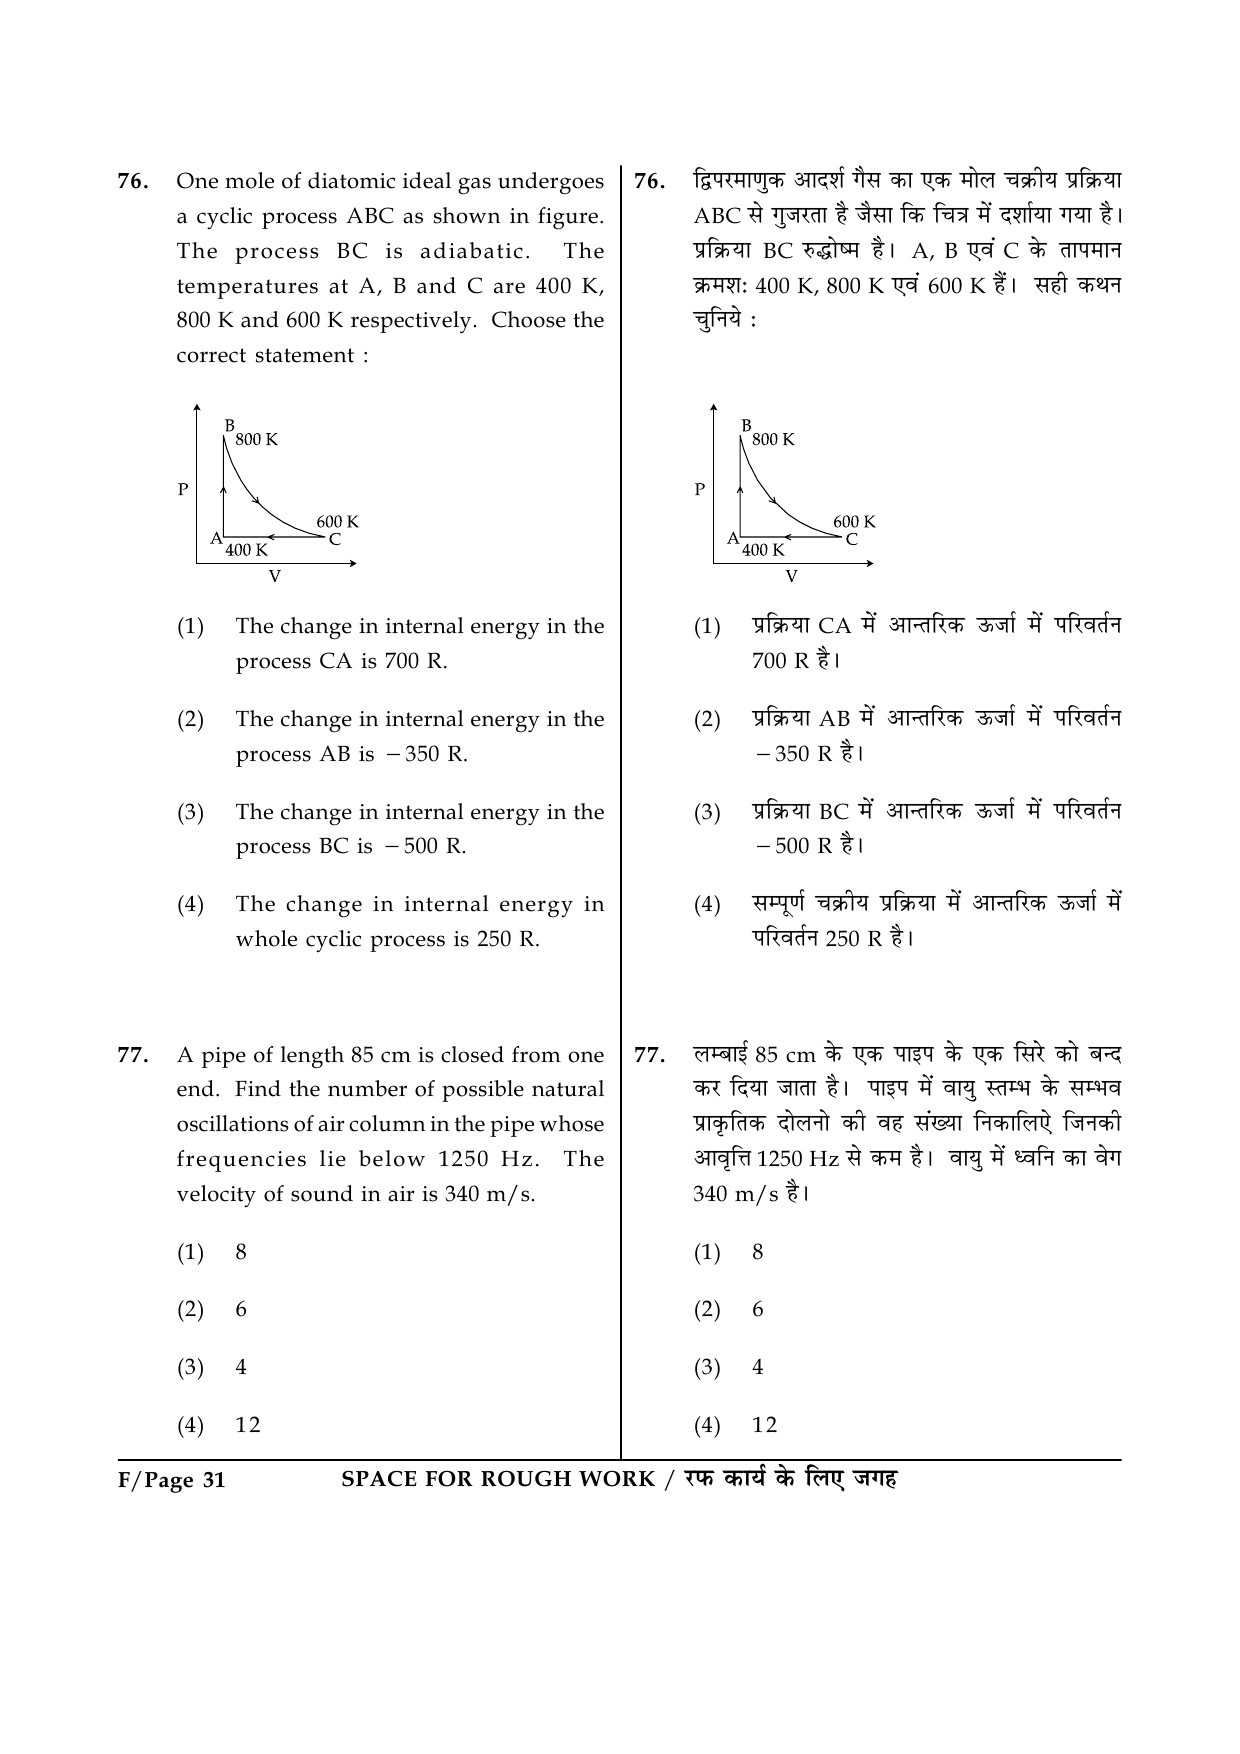 JEE Main Exam Question Paper 2014 Booklet F 31